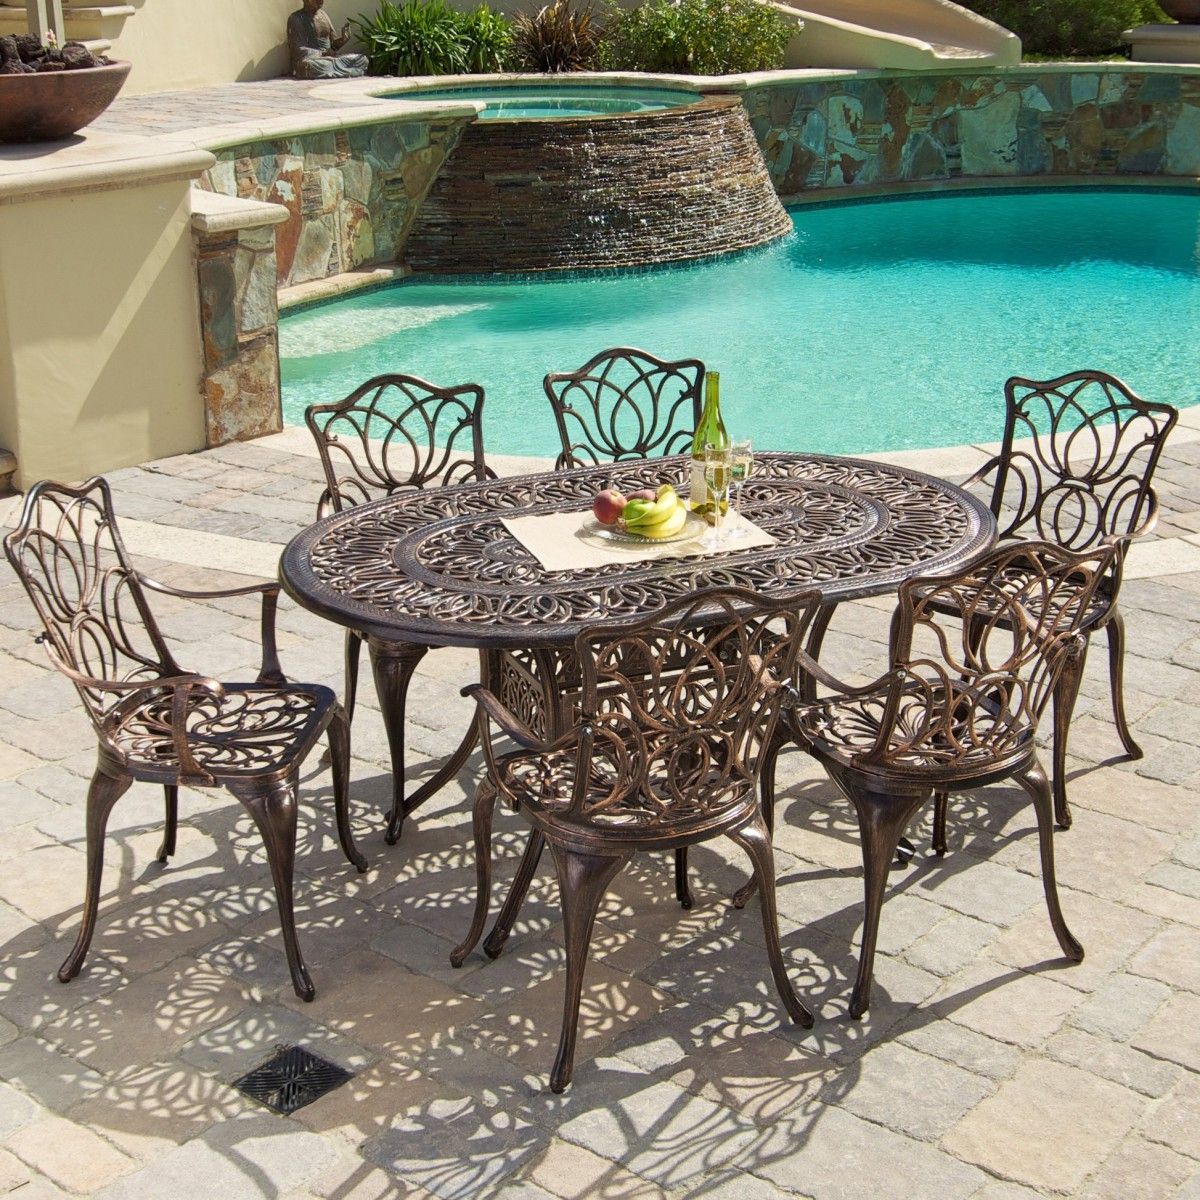 Preferred Gardena Cast Aluminum 7 Piece Outdoor Dining Set With Oval Table Within 7 Piece Outdoor Oval Dining Sets (View 2 of 15)